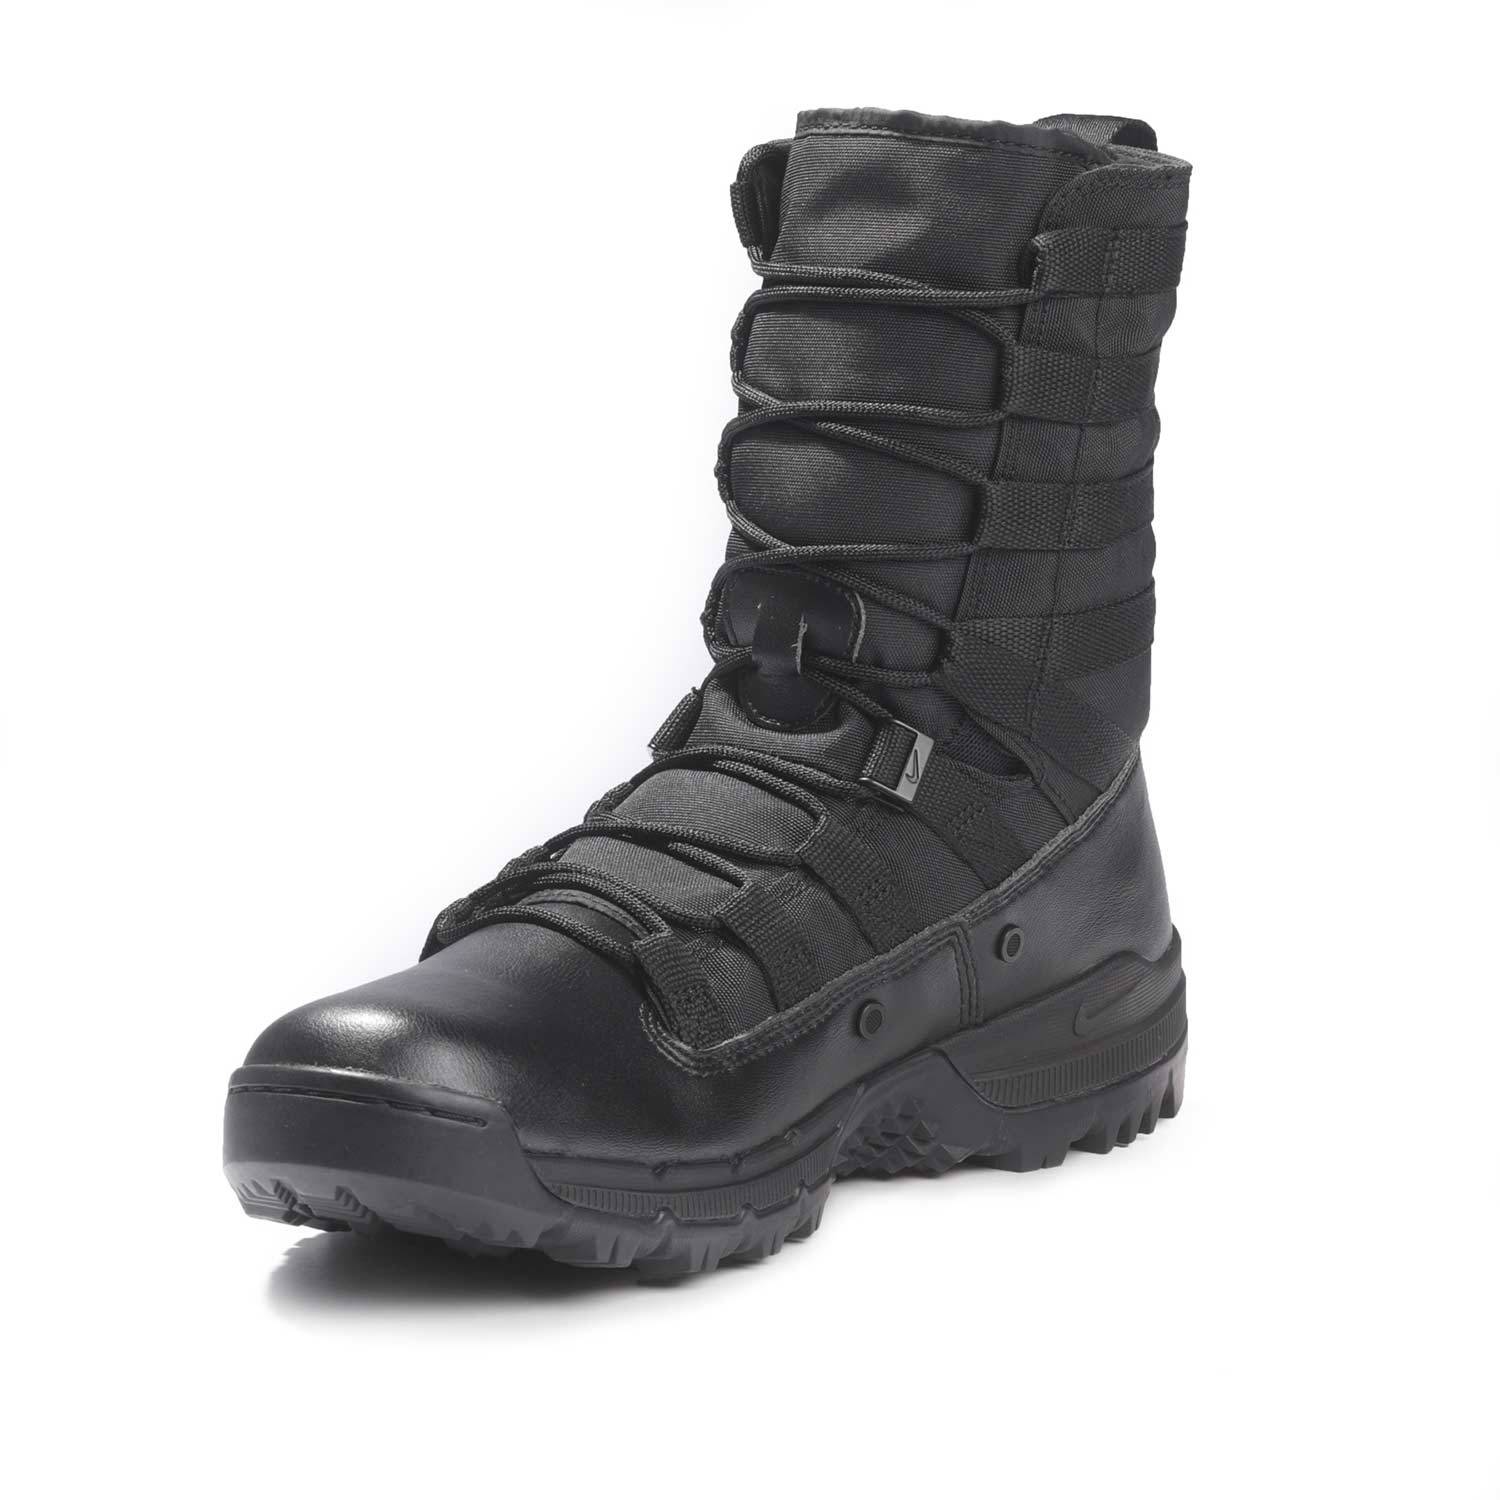 The other day Ten years Boring Nike SFB Gen 2 8" Boots | Tactical Boots